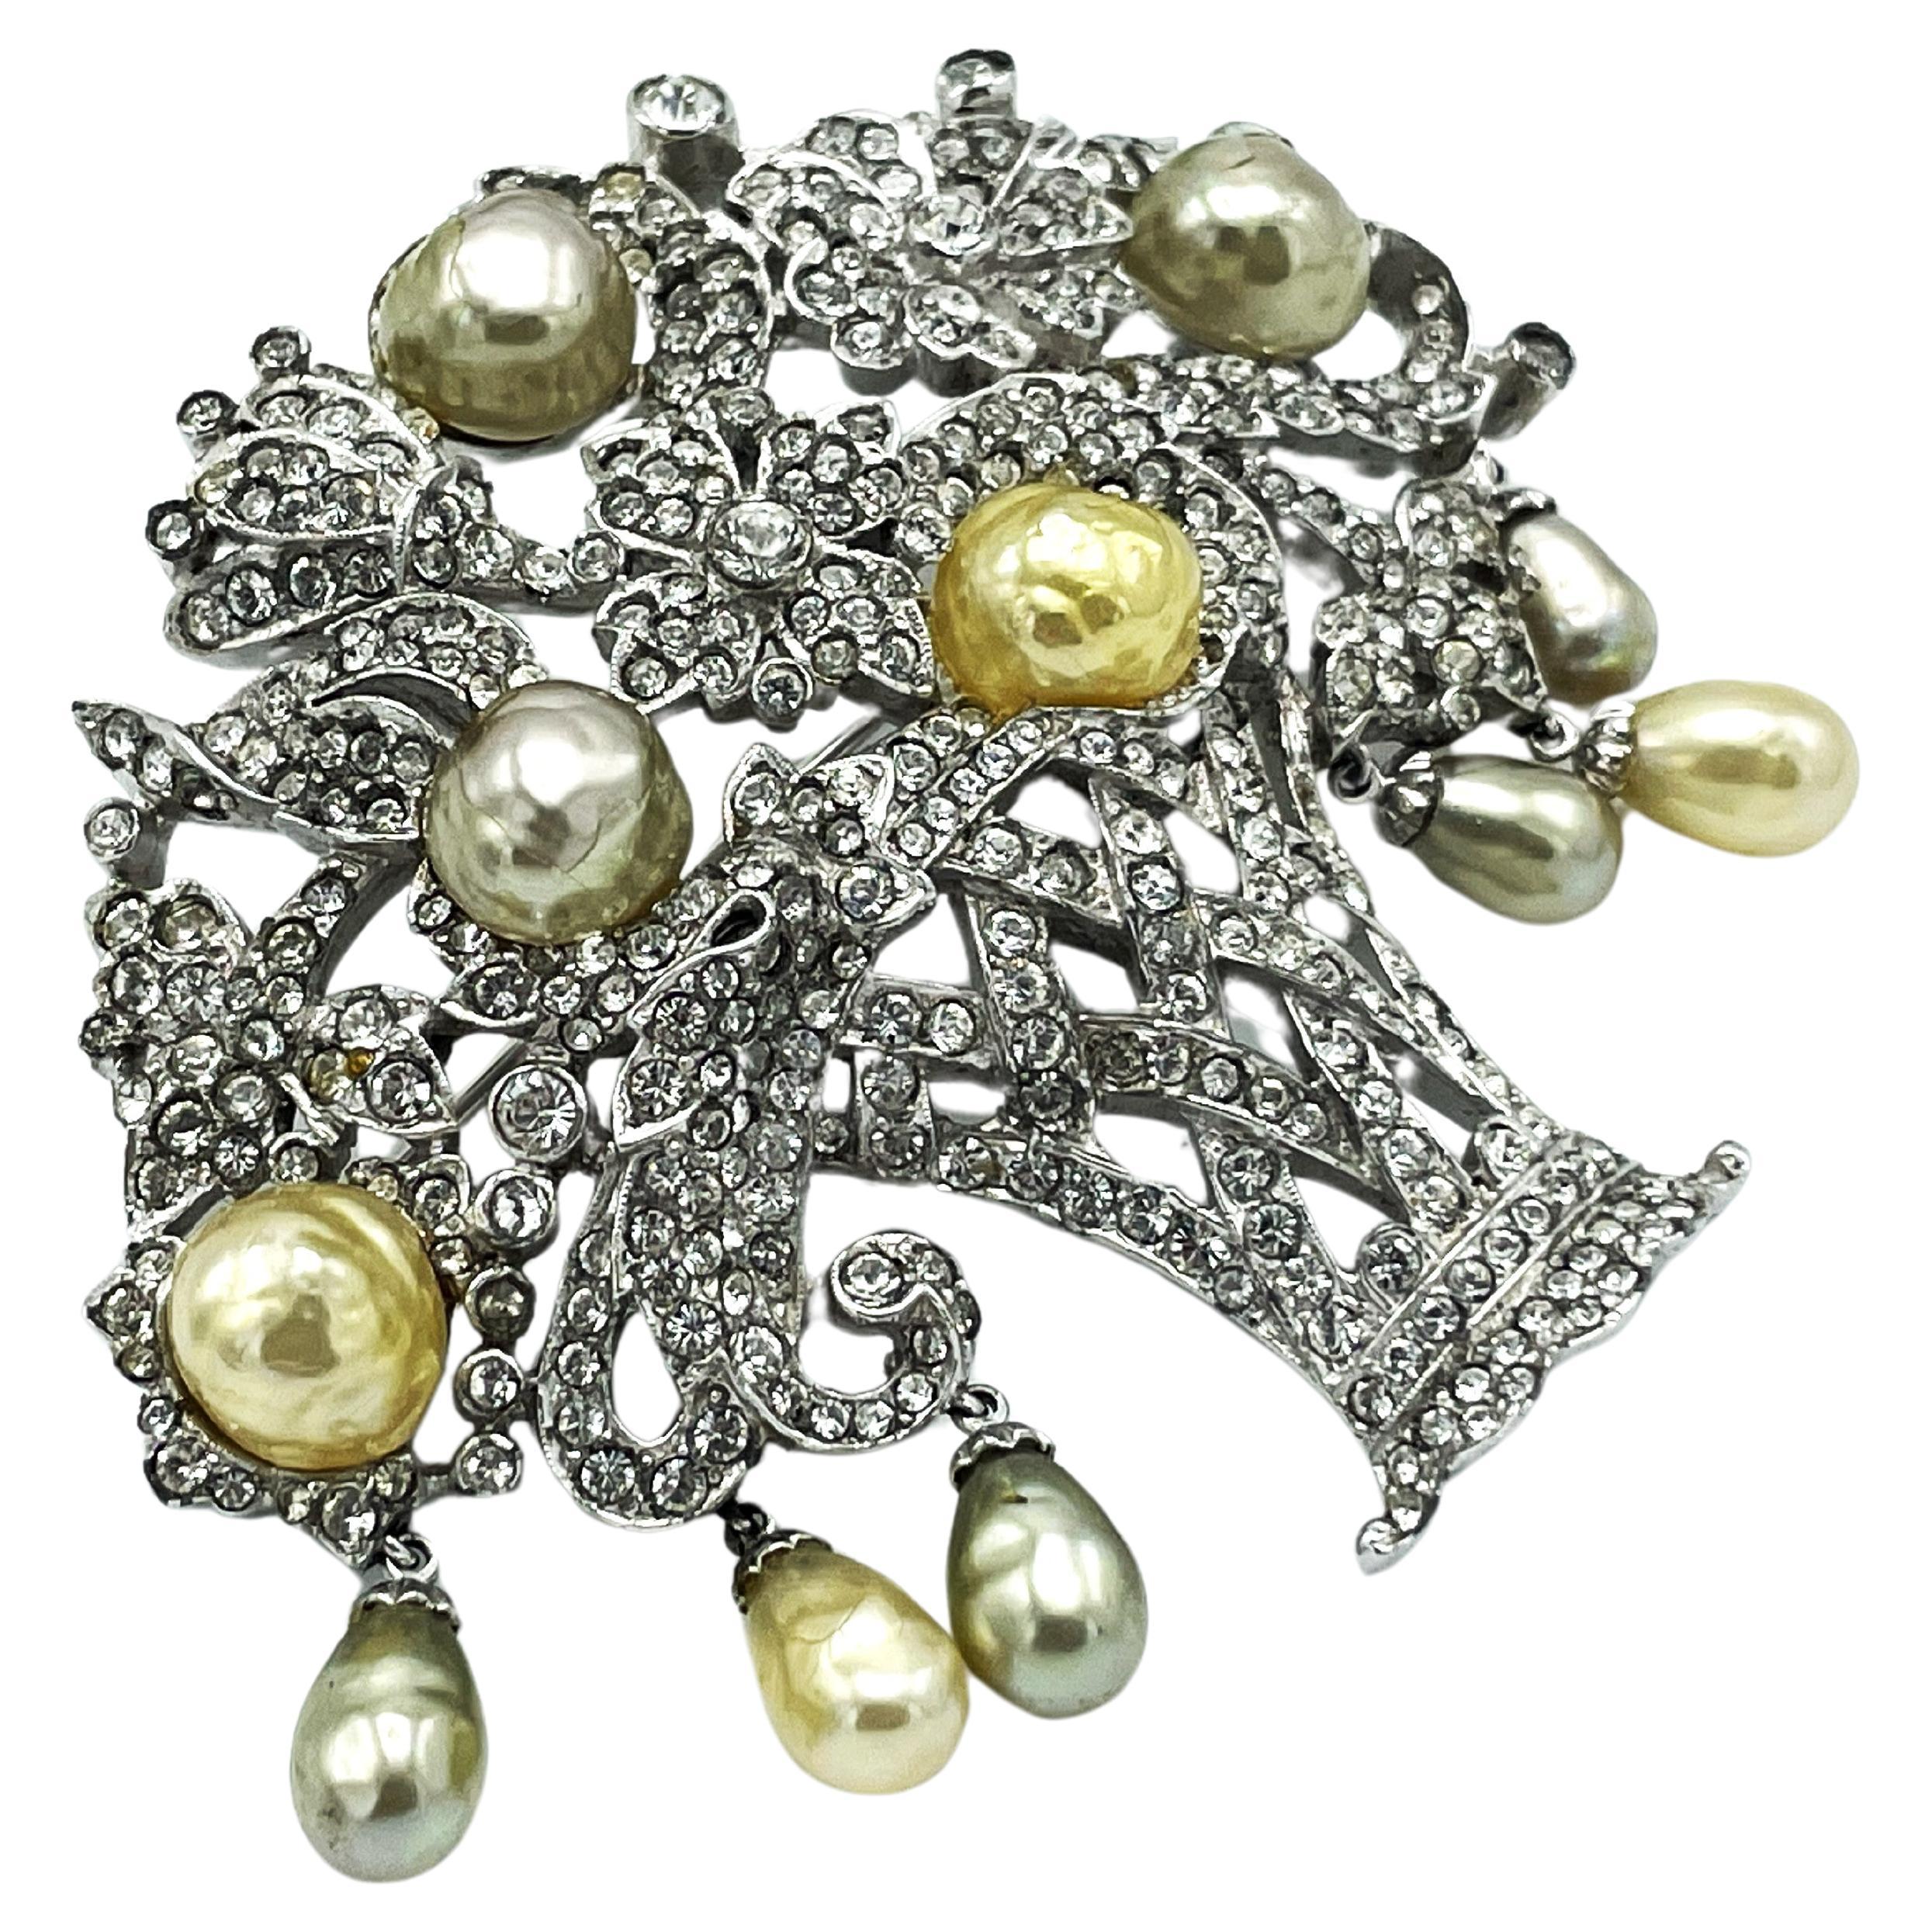 Beautiful basket brooch, with flowers and leaves, fully set with small rhinestones, hanging pearl drops and 5 larger pearls in natural and silver.

Size:
Height 5.5cm
Width 6.5cm
Features:
- Perfect condition - nothing missing.
- Rhodium 
- Early